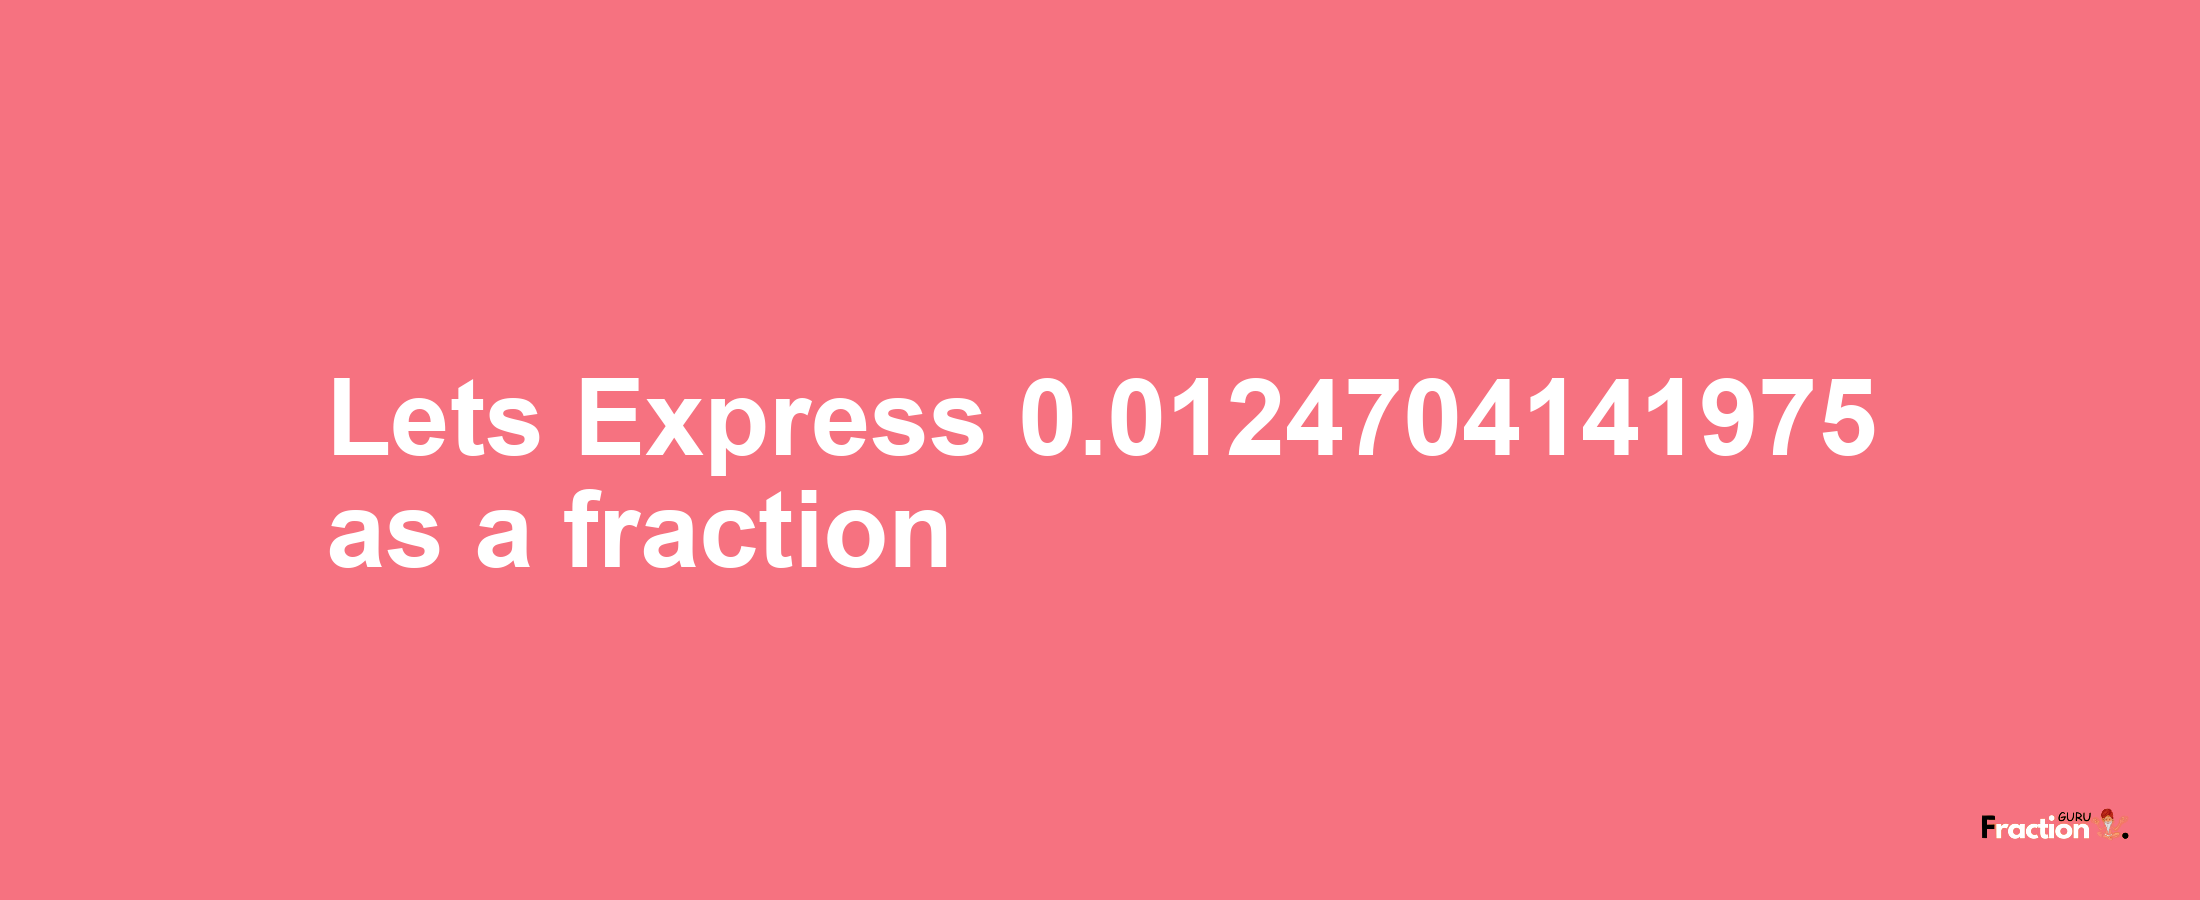 Lets Express 0.0124704141975 as afraction